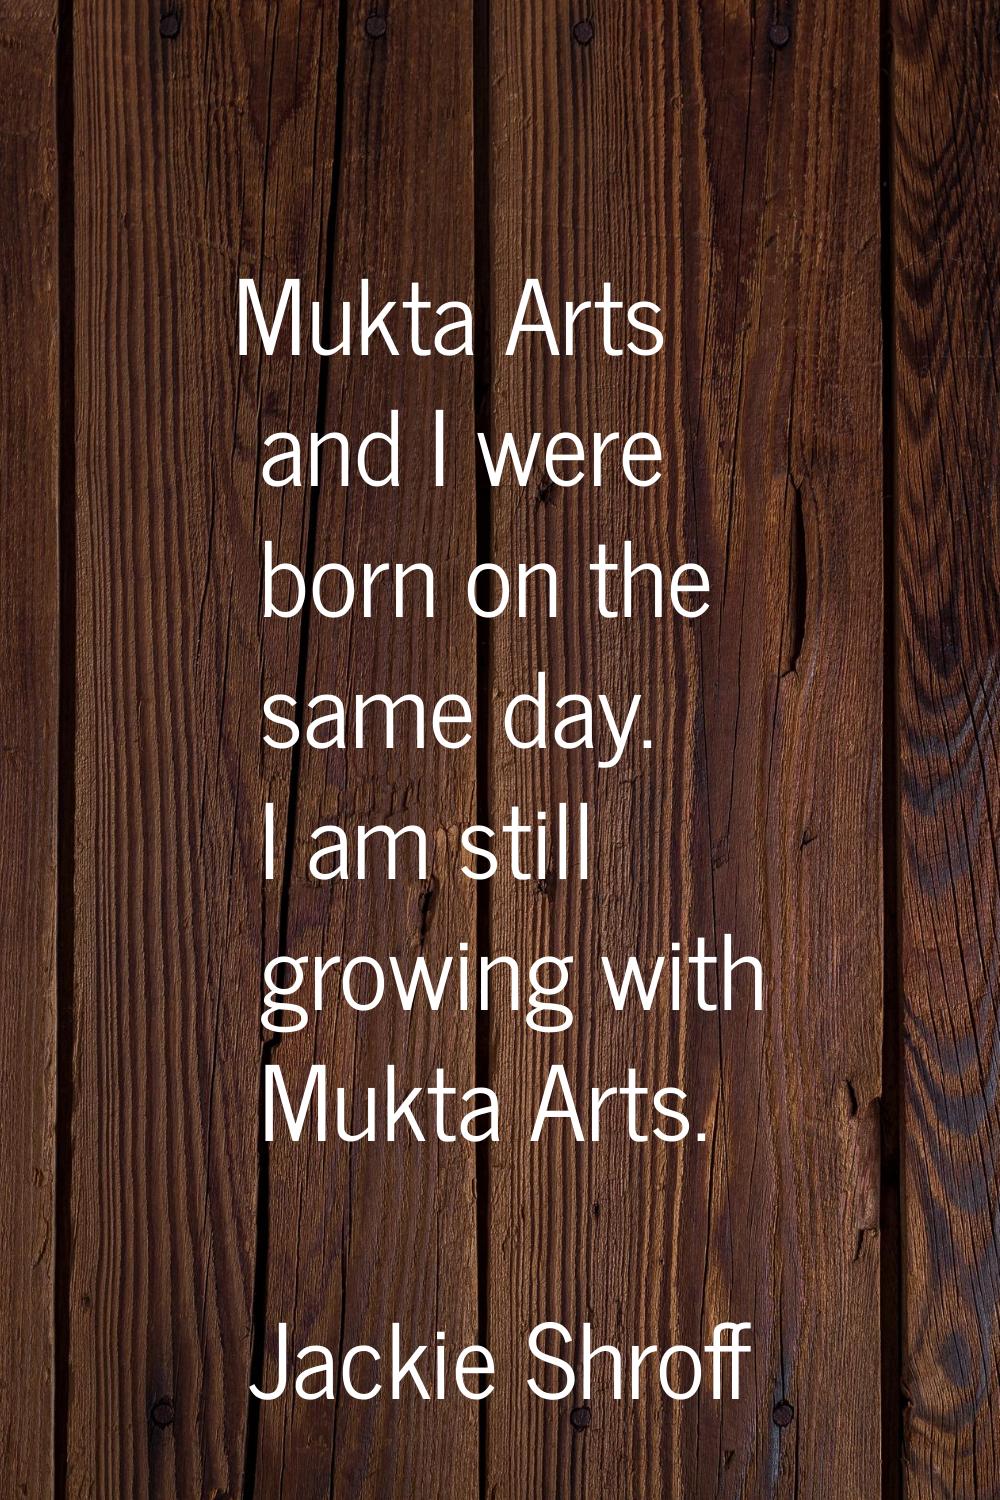 Mukta Arts and I were born on the same day. I am still growing with Mukta Arts.